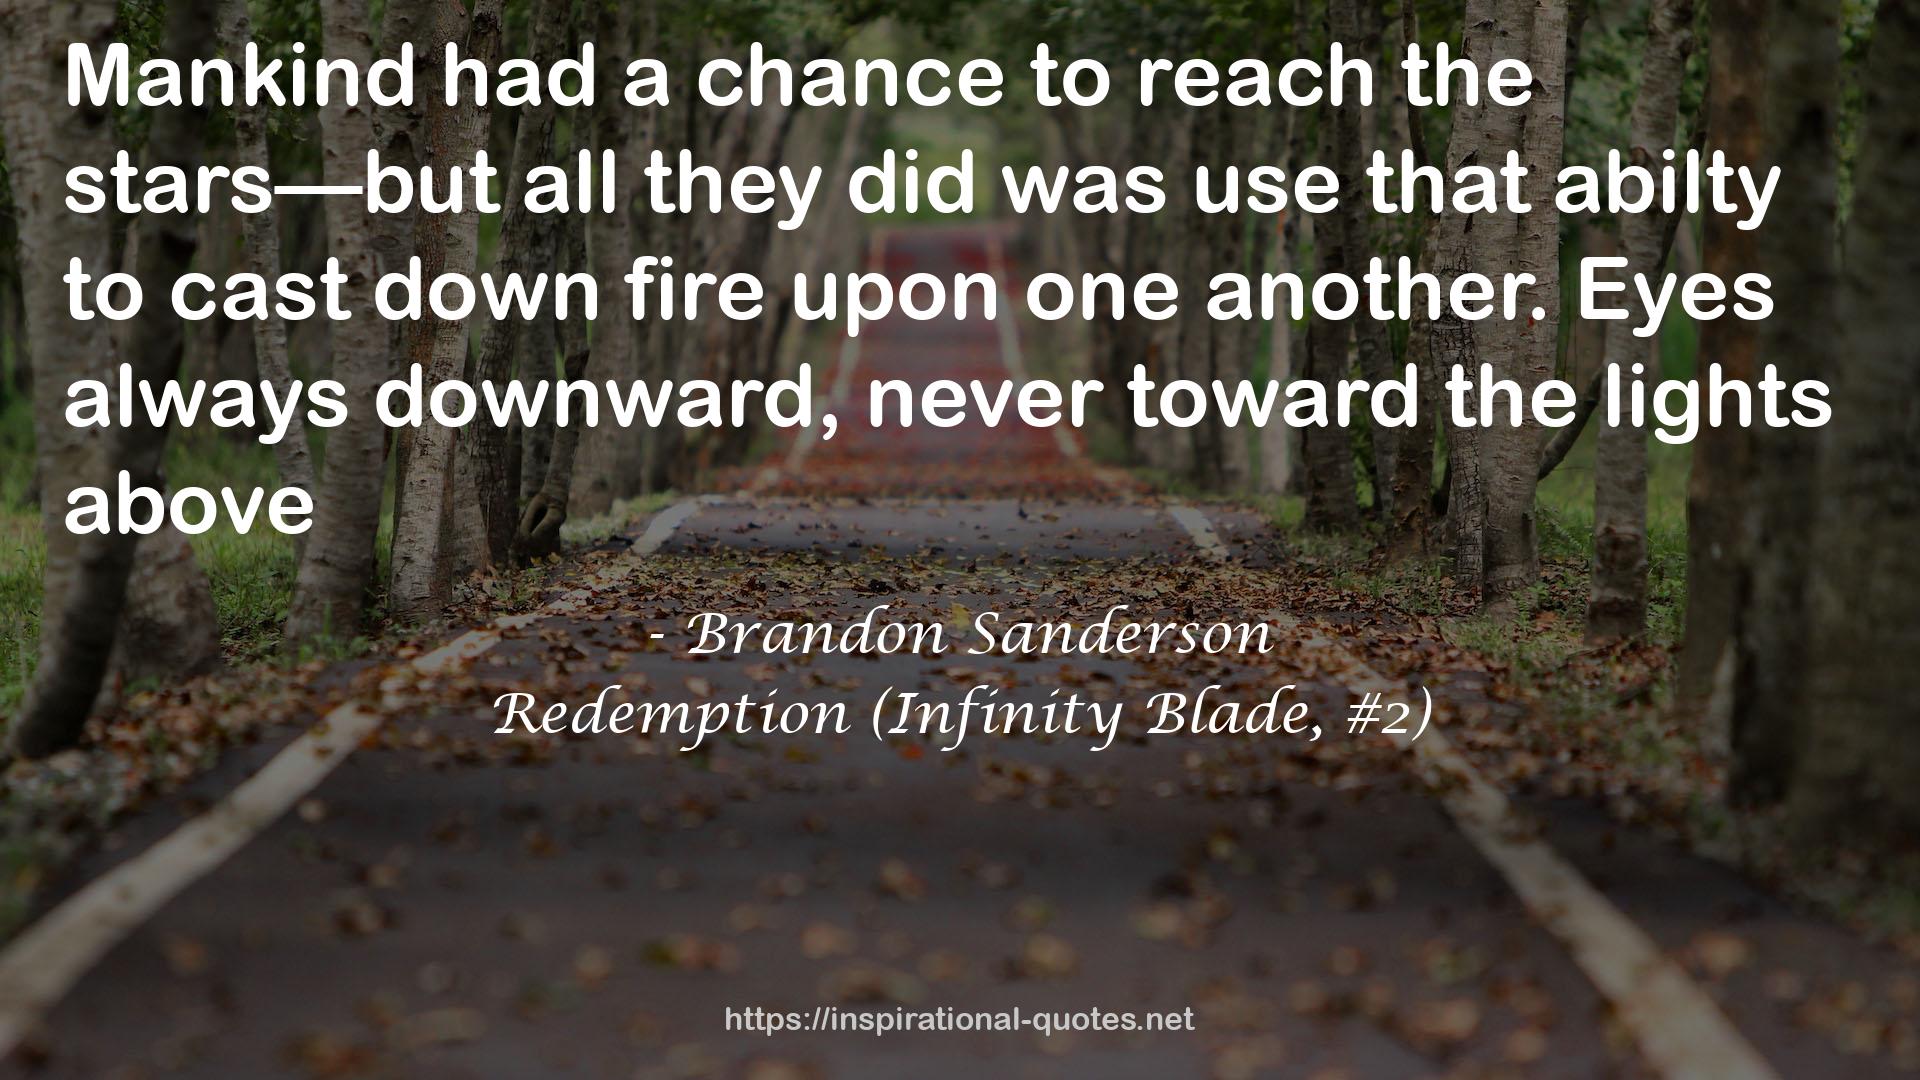 Redemption (Infinity Blade, #2) QUOTES